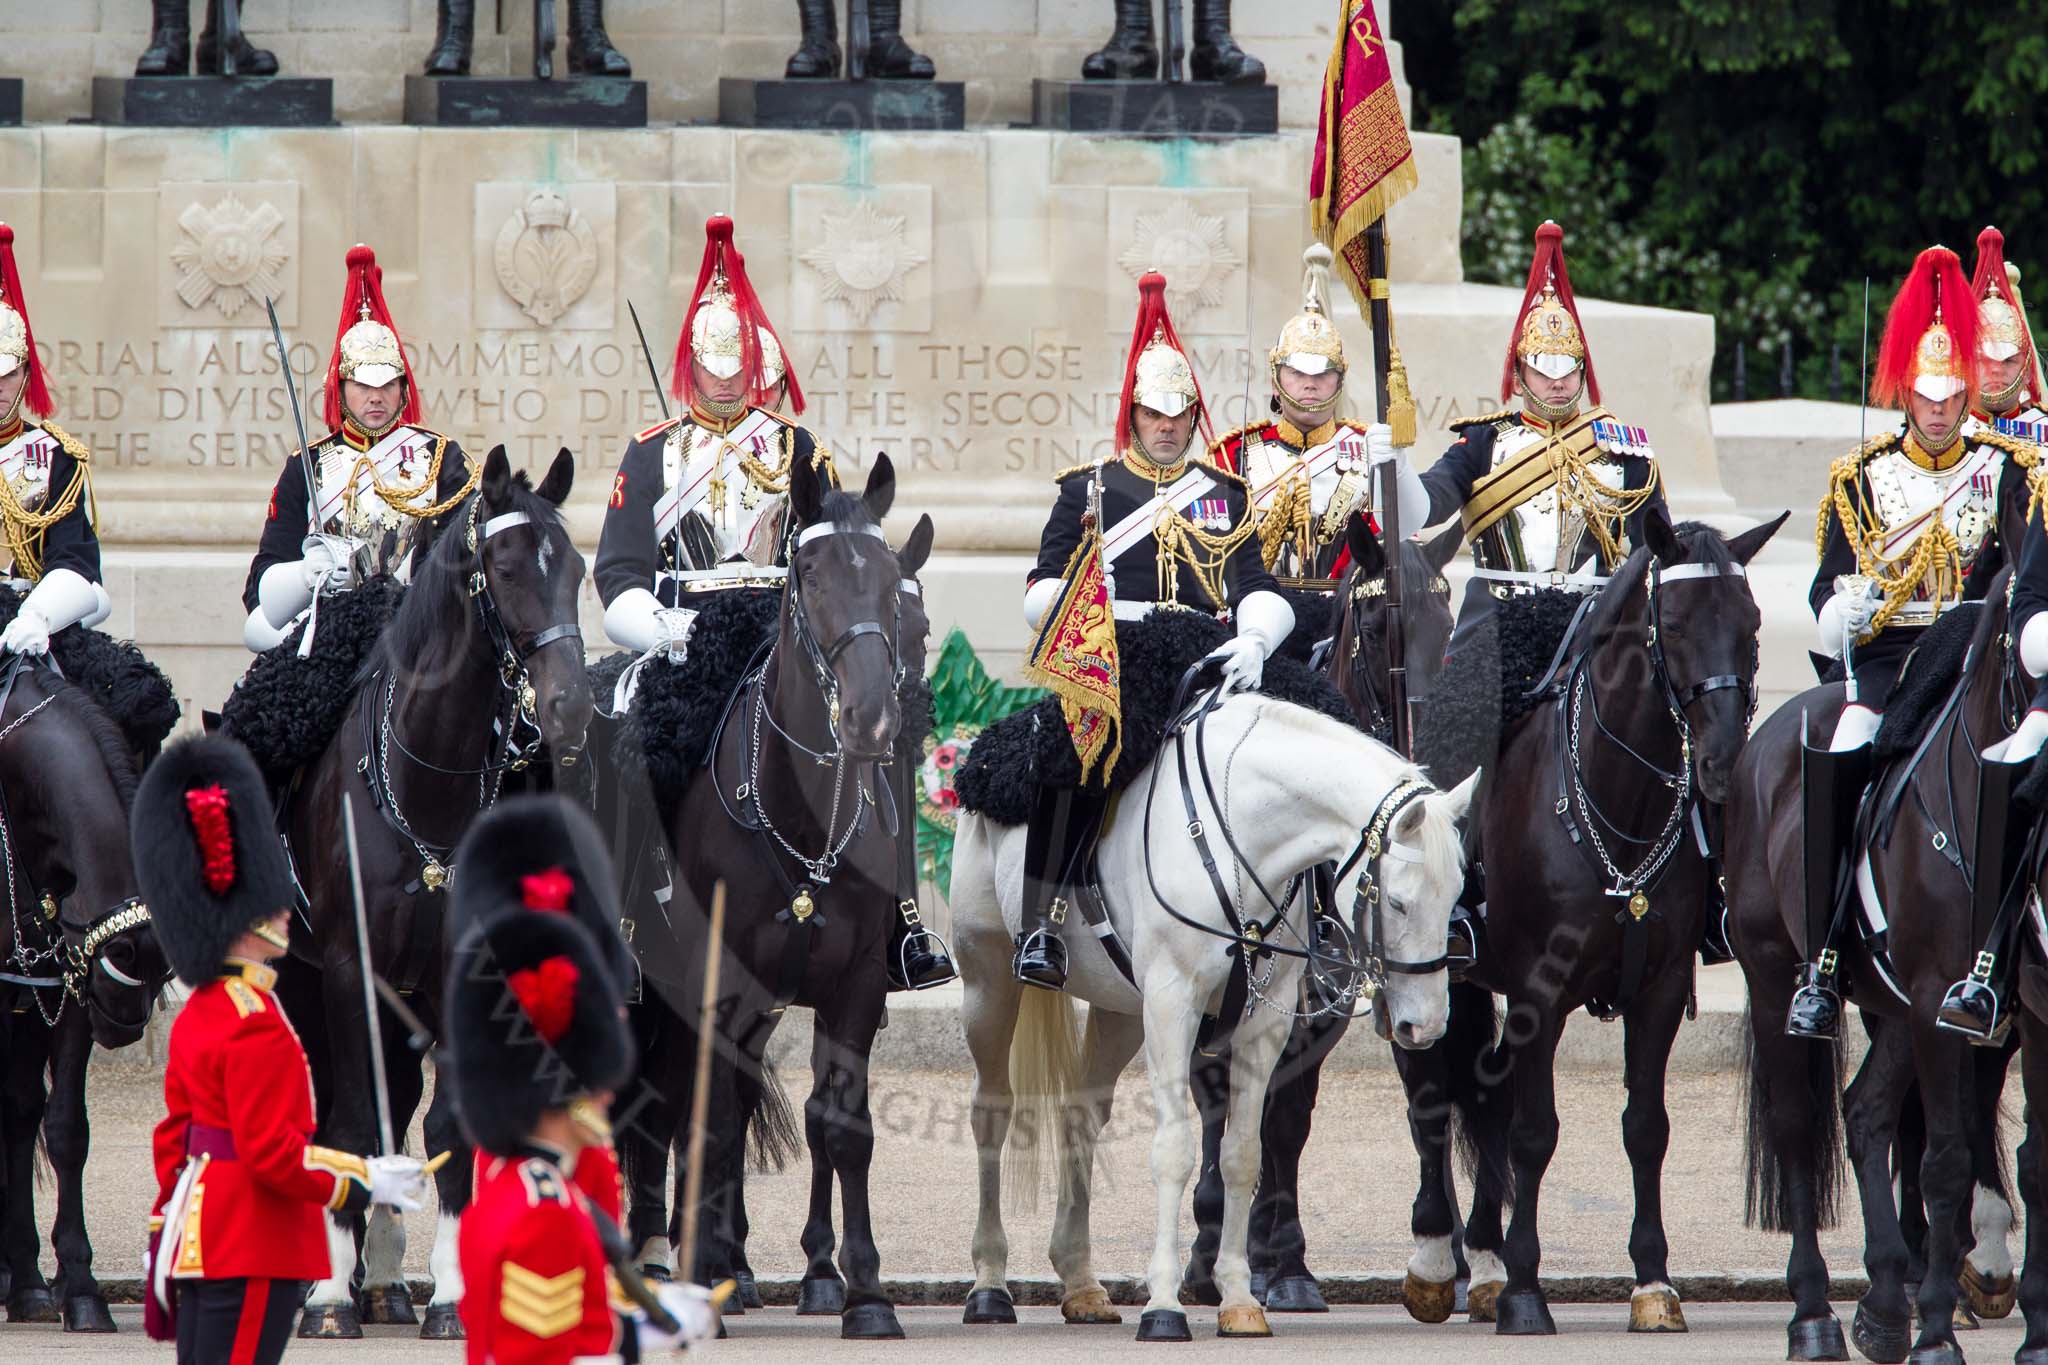 The Colonel's Review 2012: Standard Coverer, Standard Bearer, Trumpeter, and members of The Blues and Royals in front of the Guards Memorial..
Horse Guards Parade, Westminster,
London SW1,

United Kingdom,
on 09 June 2012 at 11:28, image #300